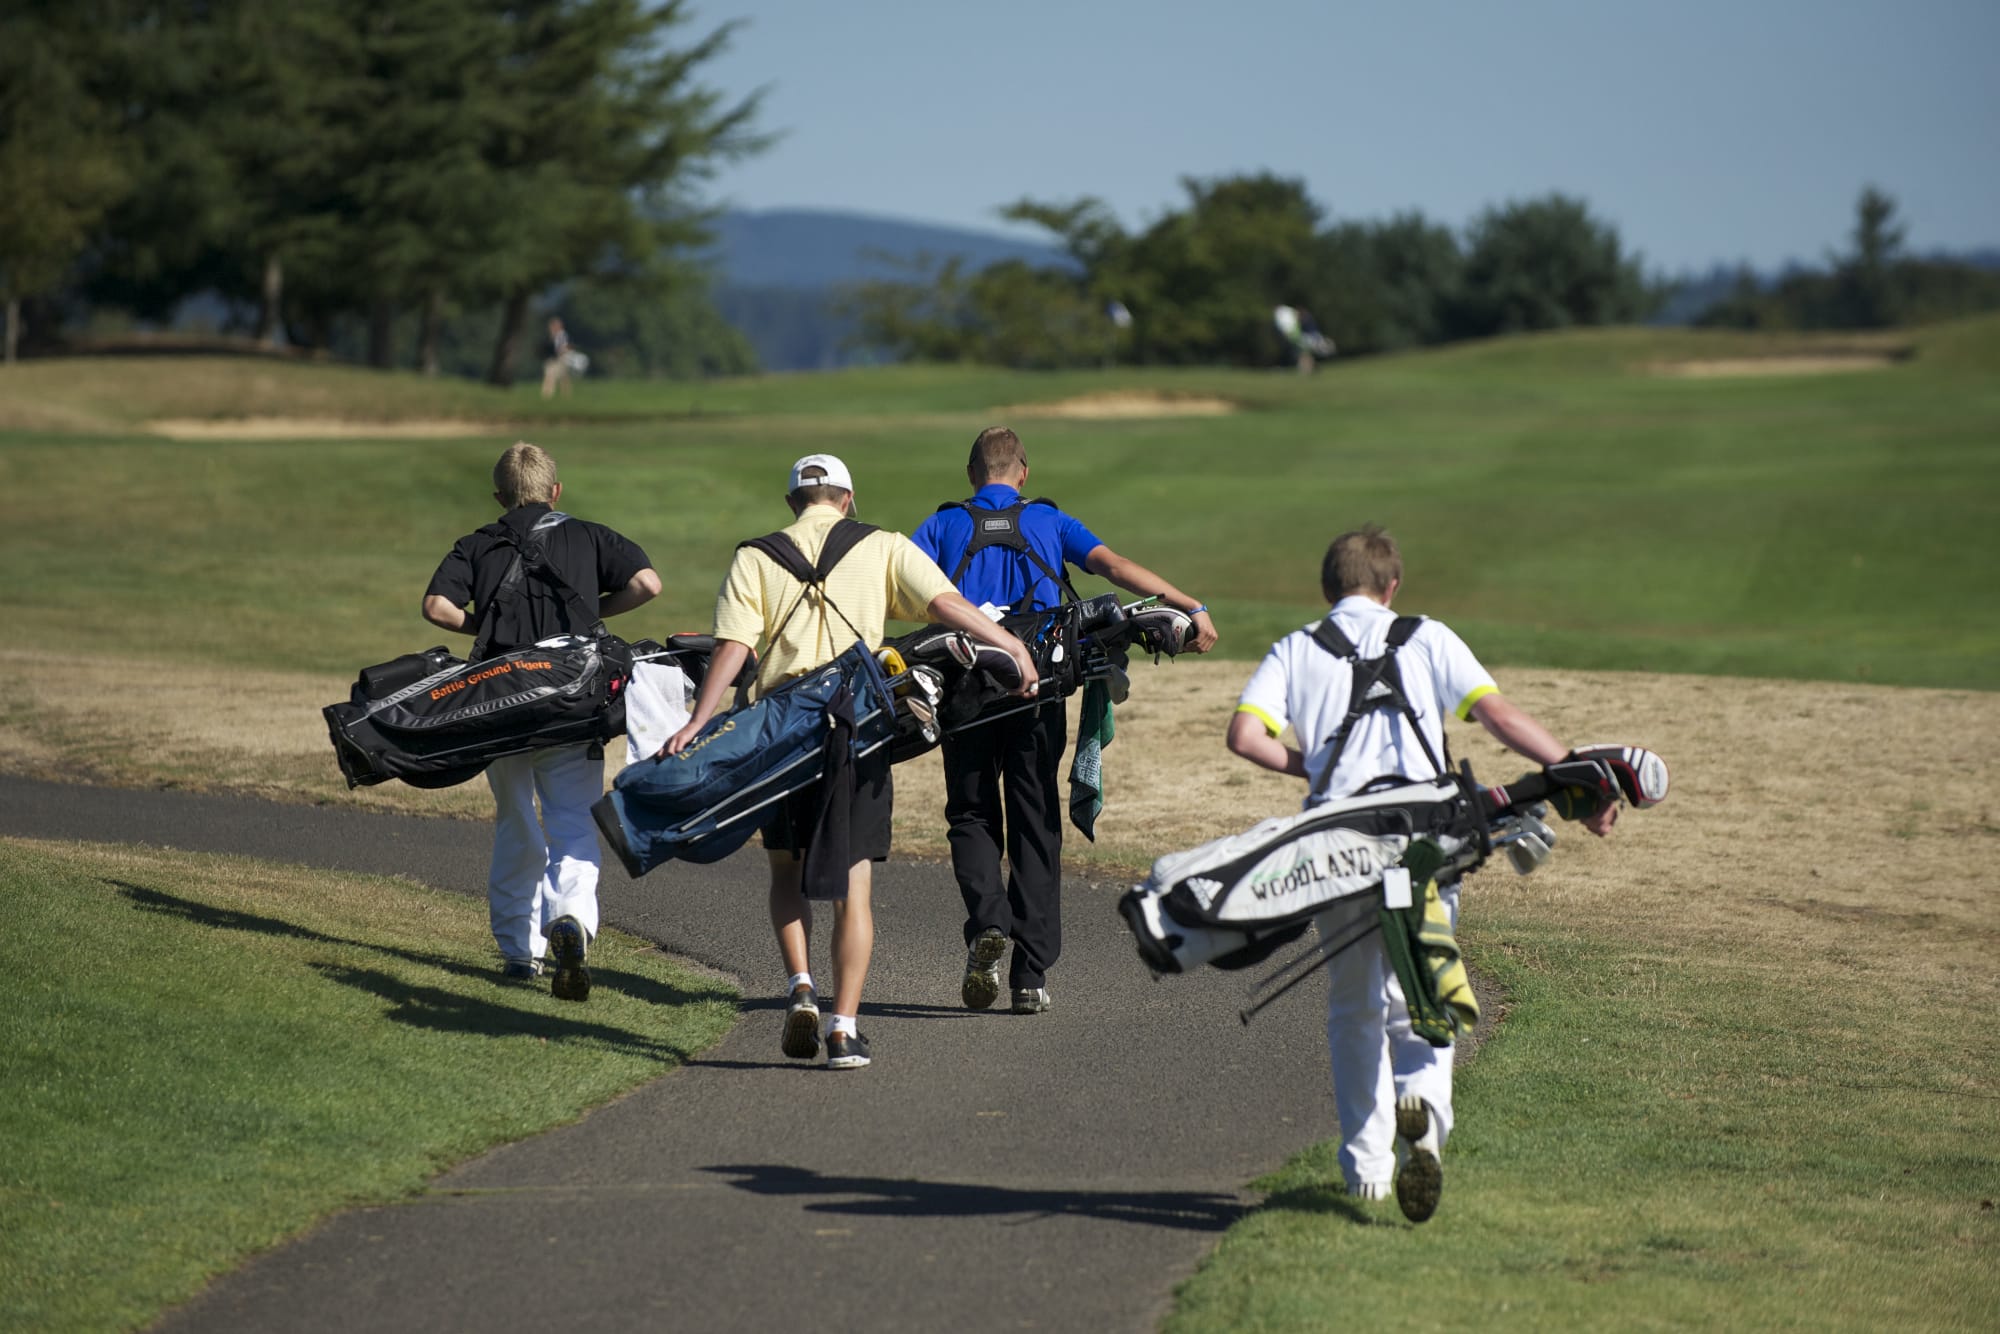 Boys golf from 2012 at Tri-Mountain Golf Course.